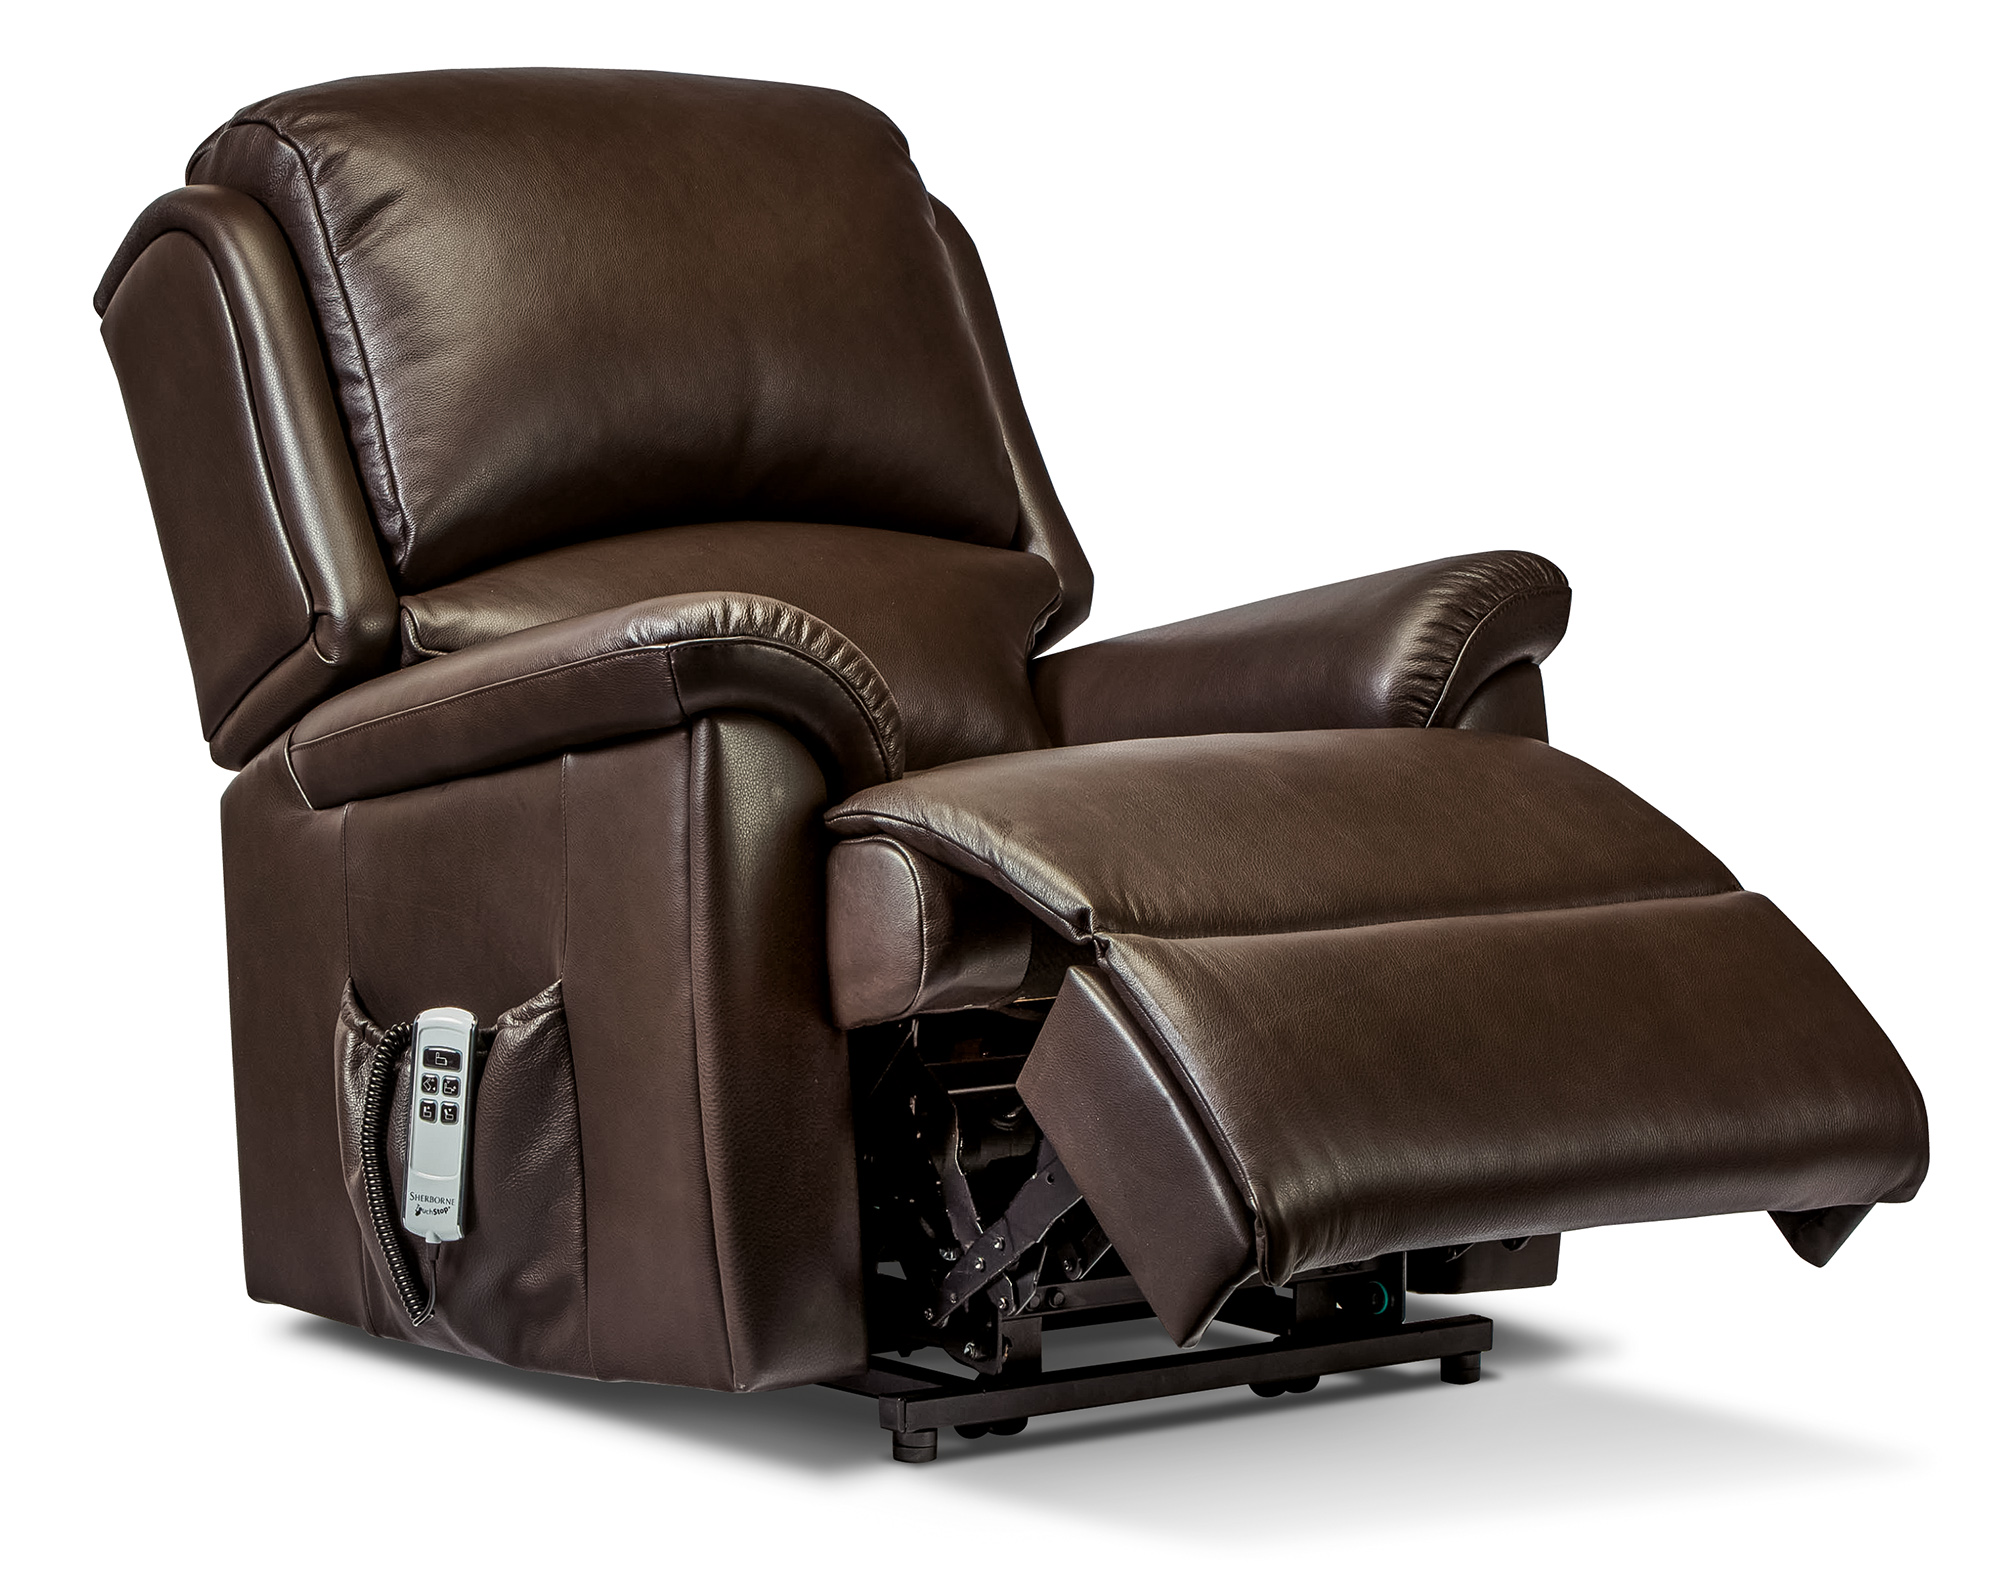 Virginia Small Leather Electric Riser Recliner - Sherborne Upholstery